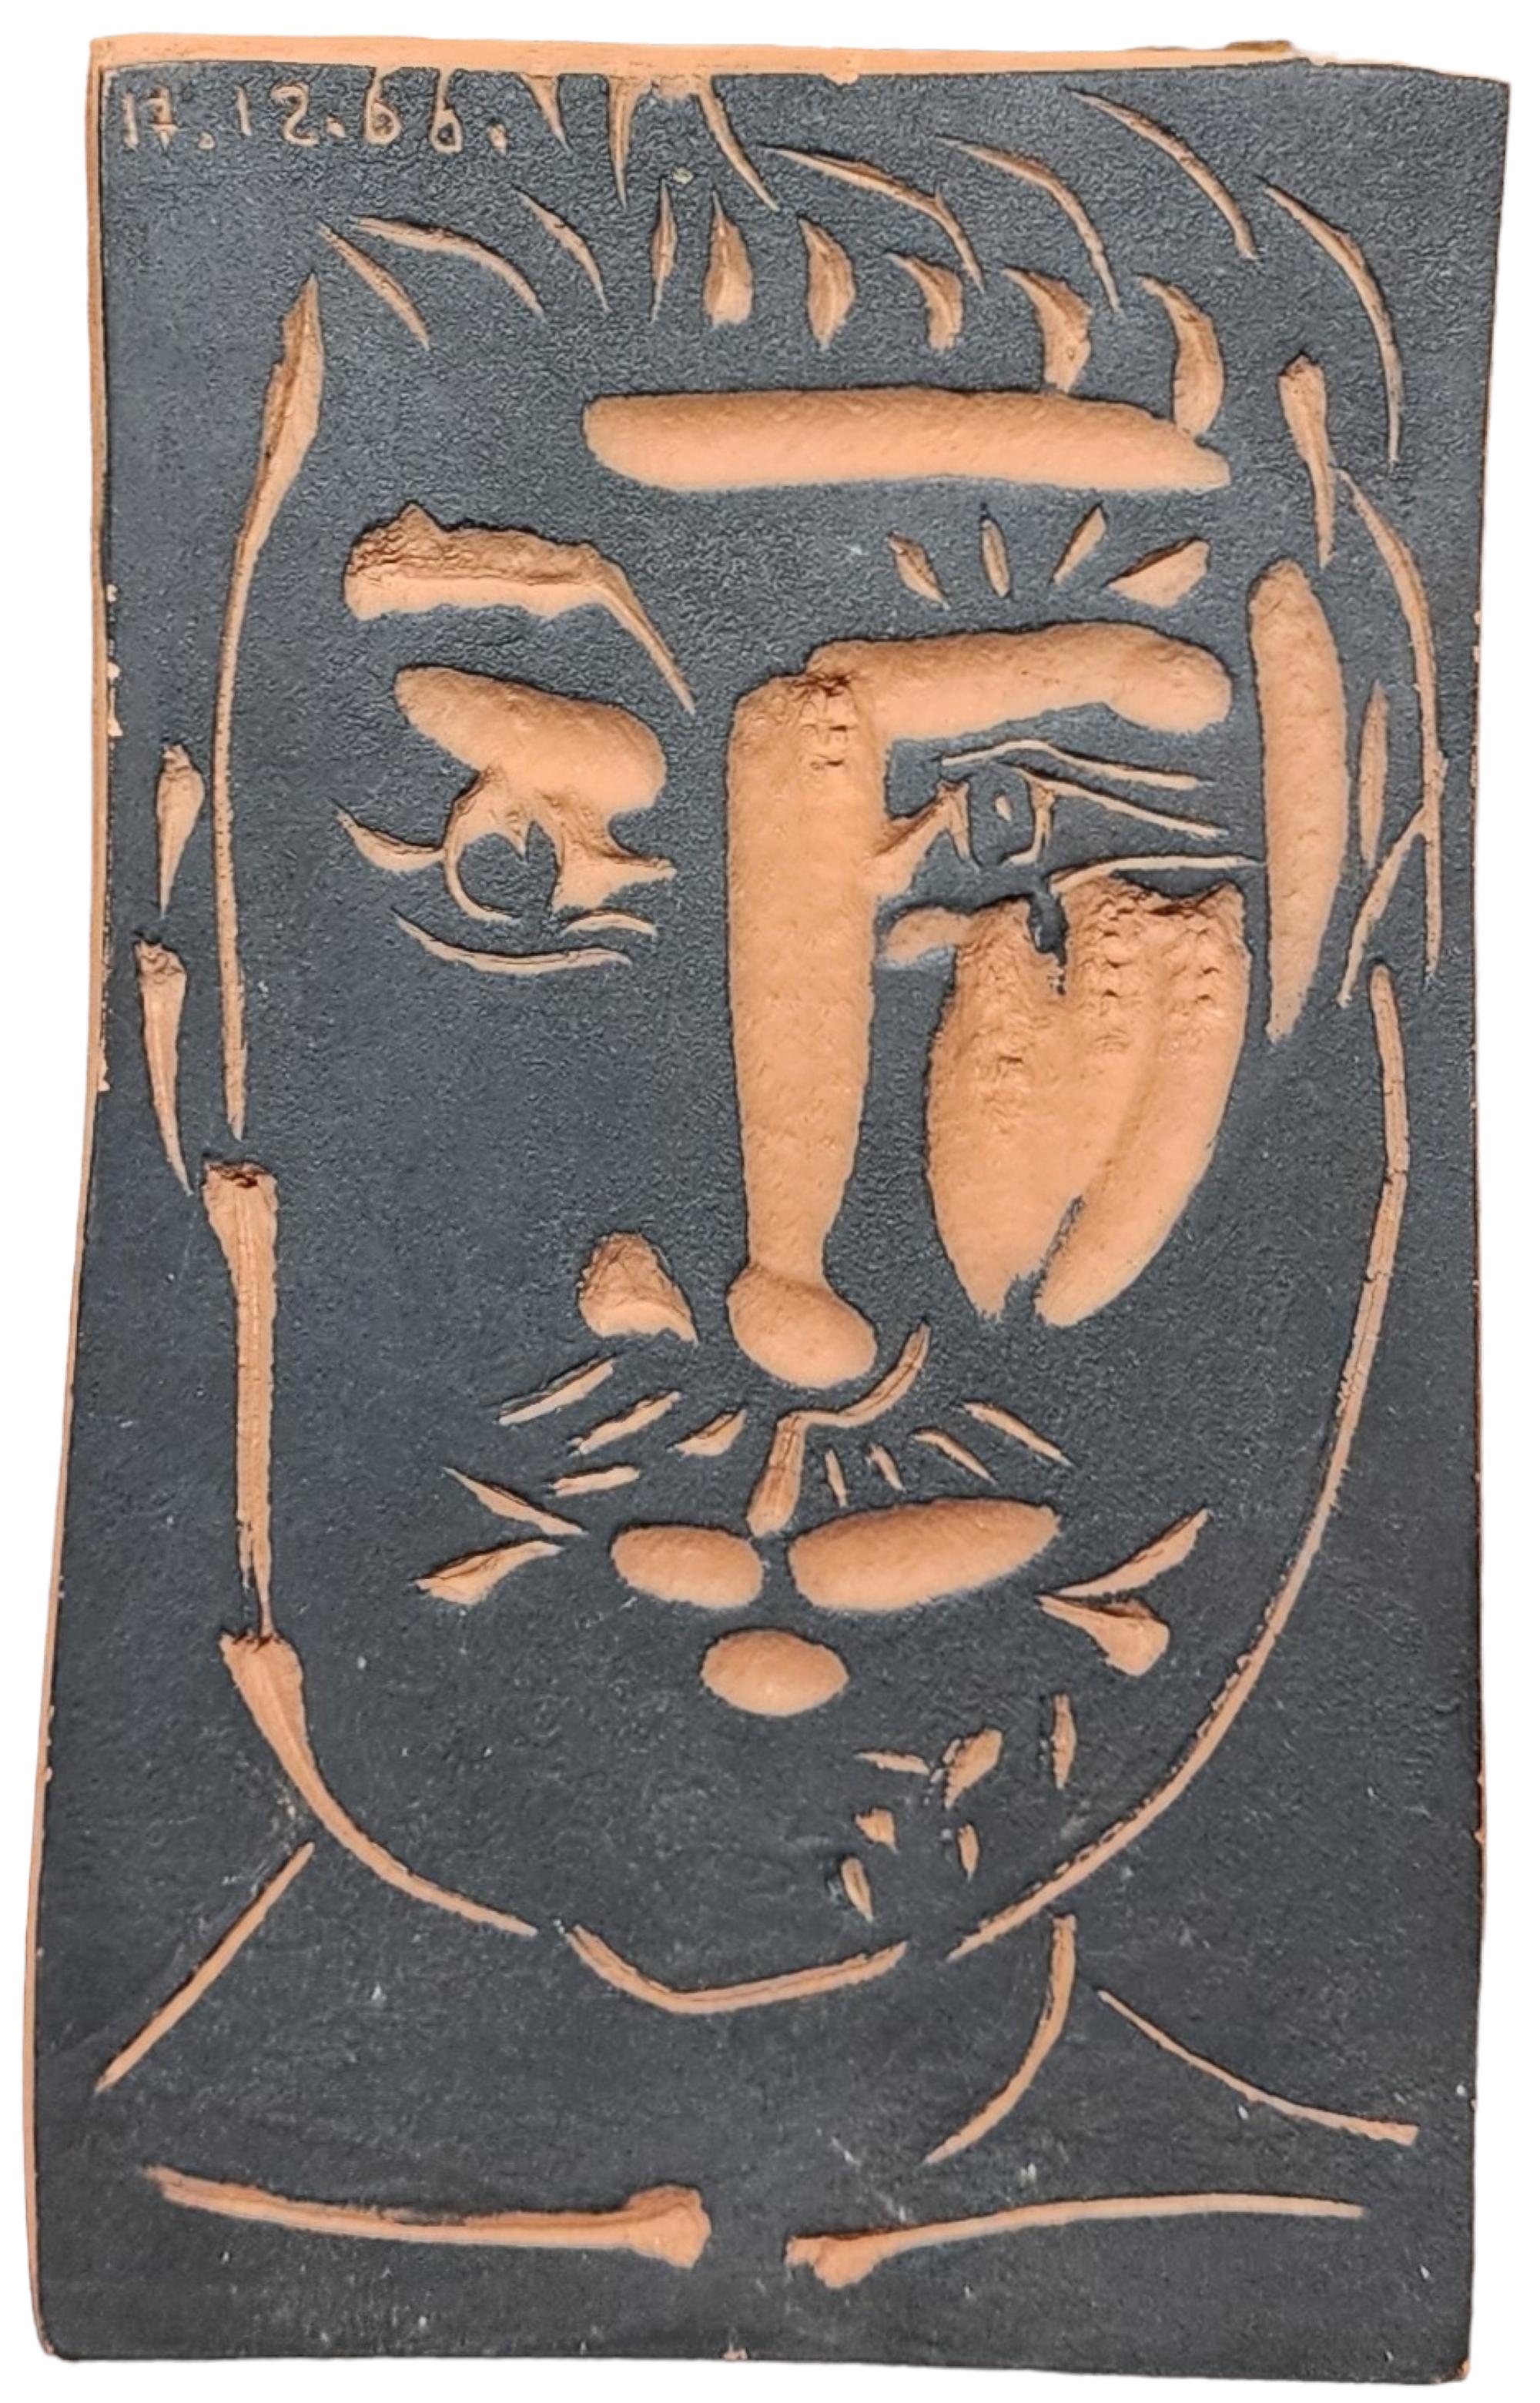 Pablo Picasso (1881-1973)

Visage d'homme, 1966

Red earthenware clay plaque

Numbered 129/500, with 'Empreinte Originale de Picasso' and 'Madoura Plein Feu' stamp on the underside.

6 1/4 x 3 7/8 x 7/8in (15.9 x 9.7 x 2.2cm)

Ramié 539